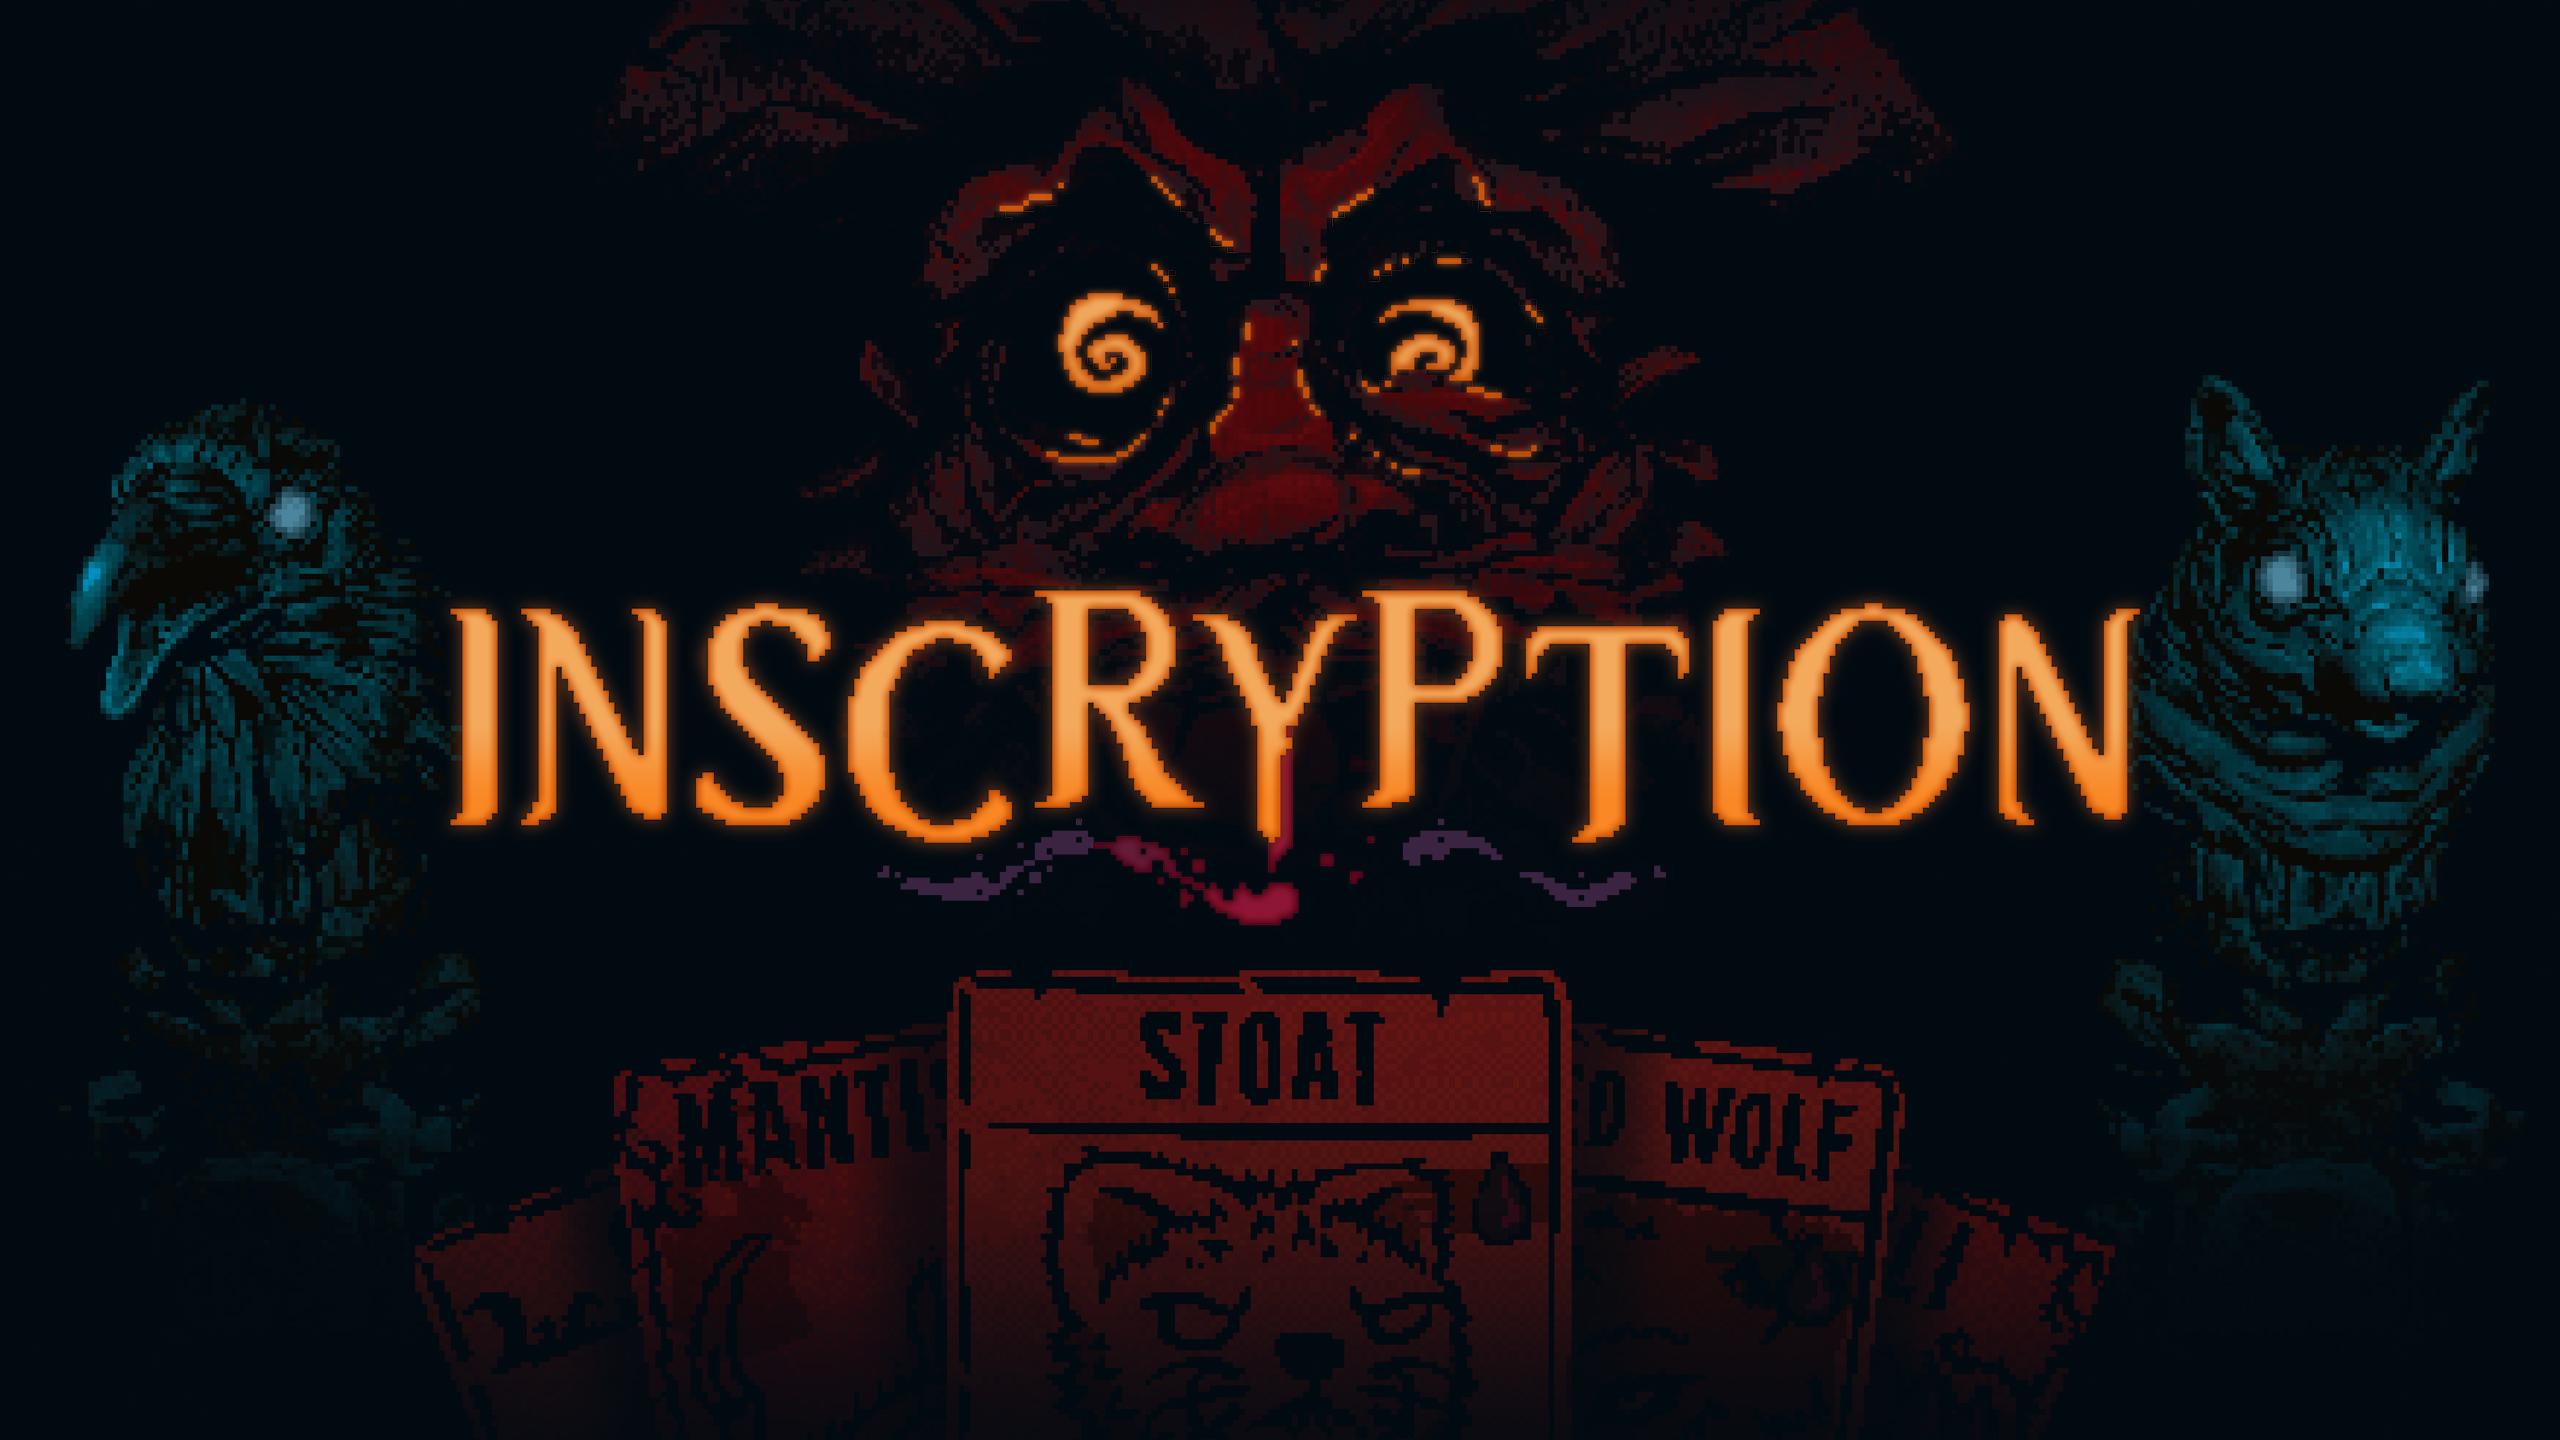 Inscryption. Download and Buy Today Games Store